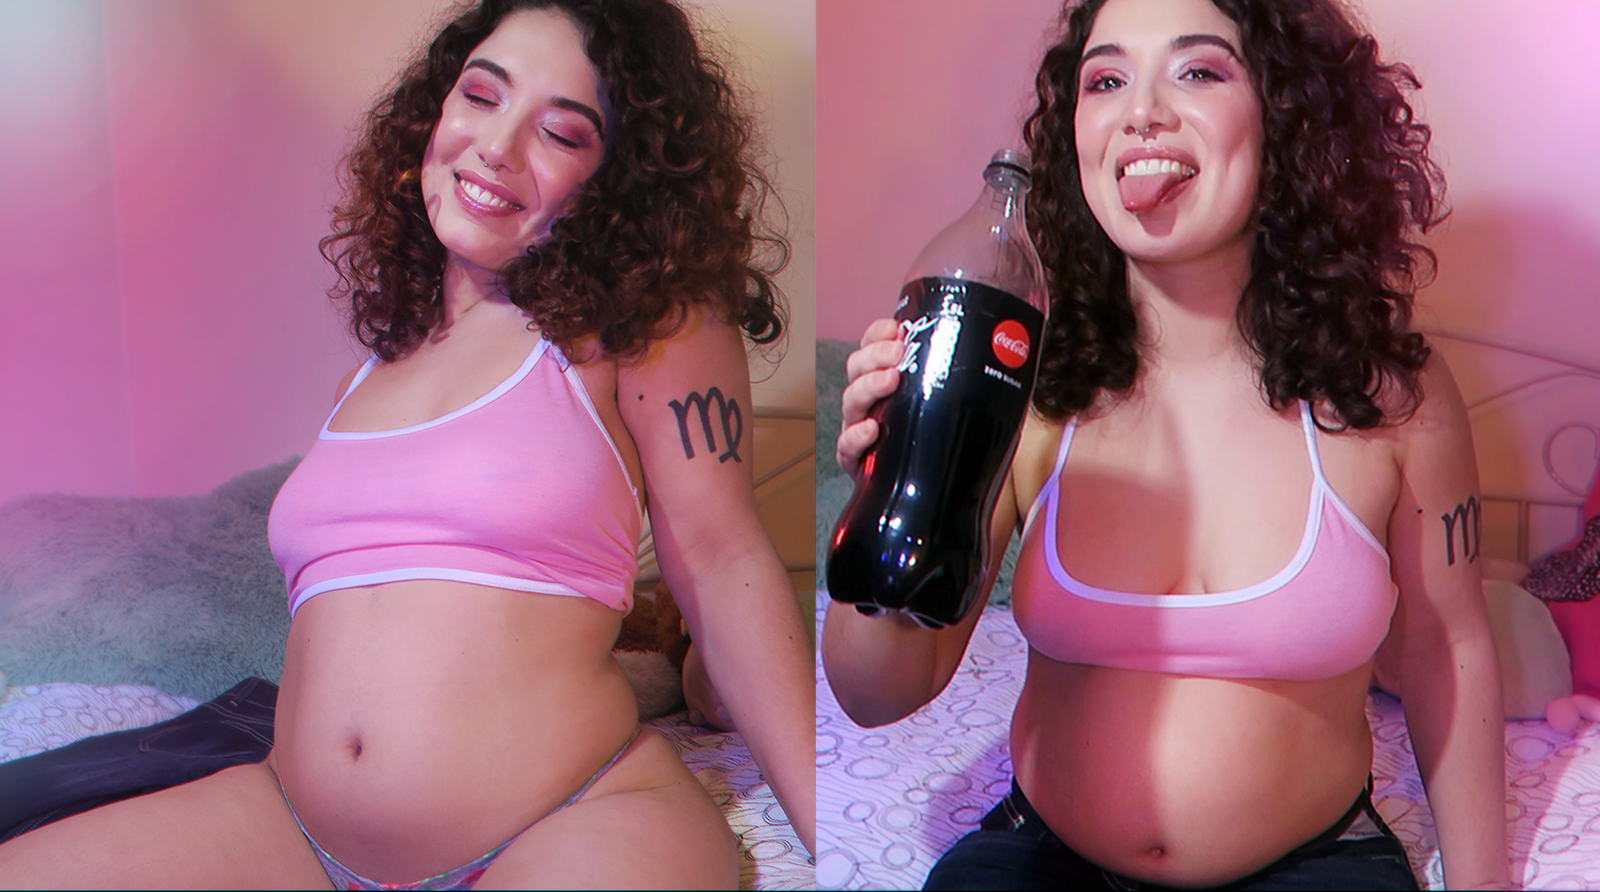 Mentos and coke bloat